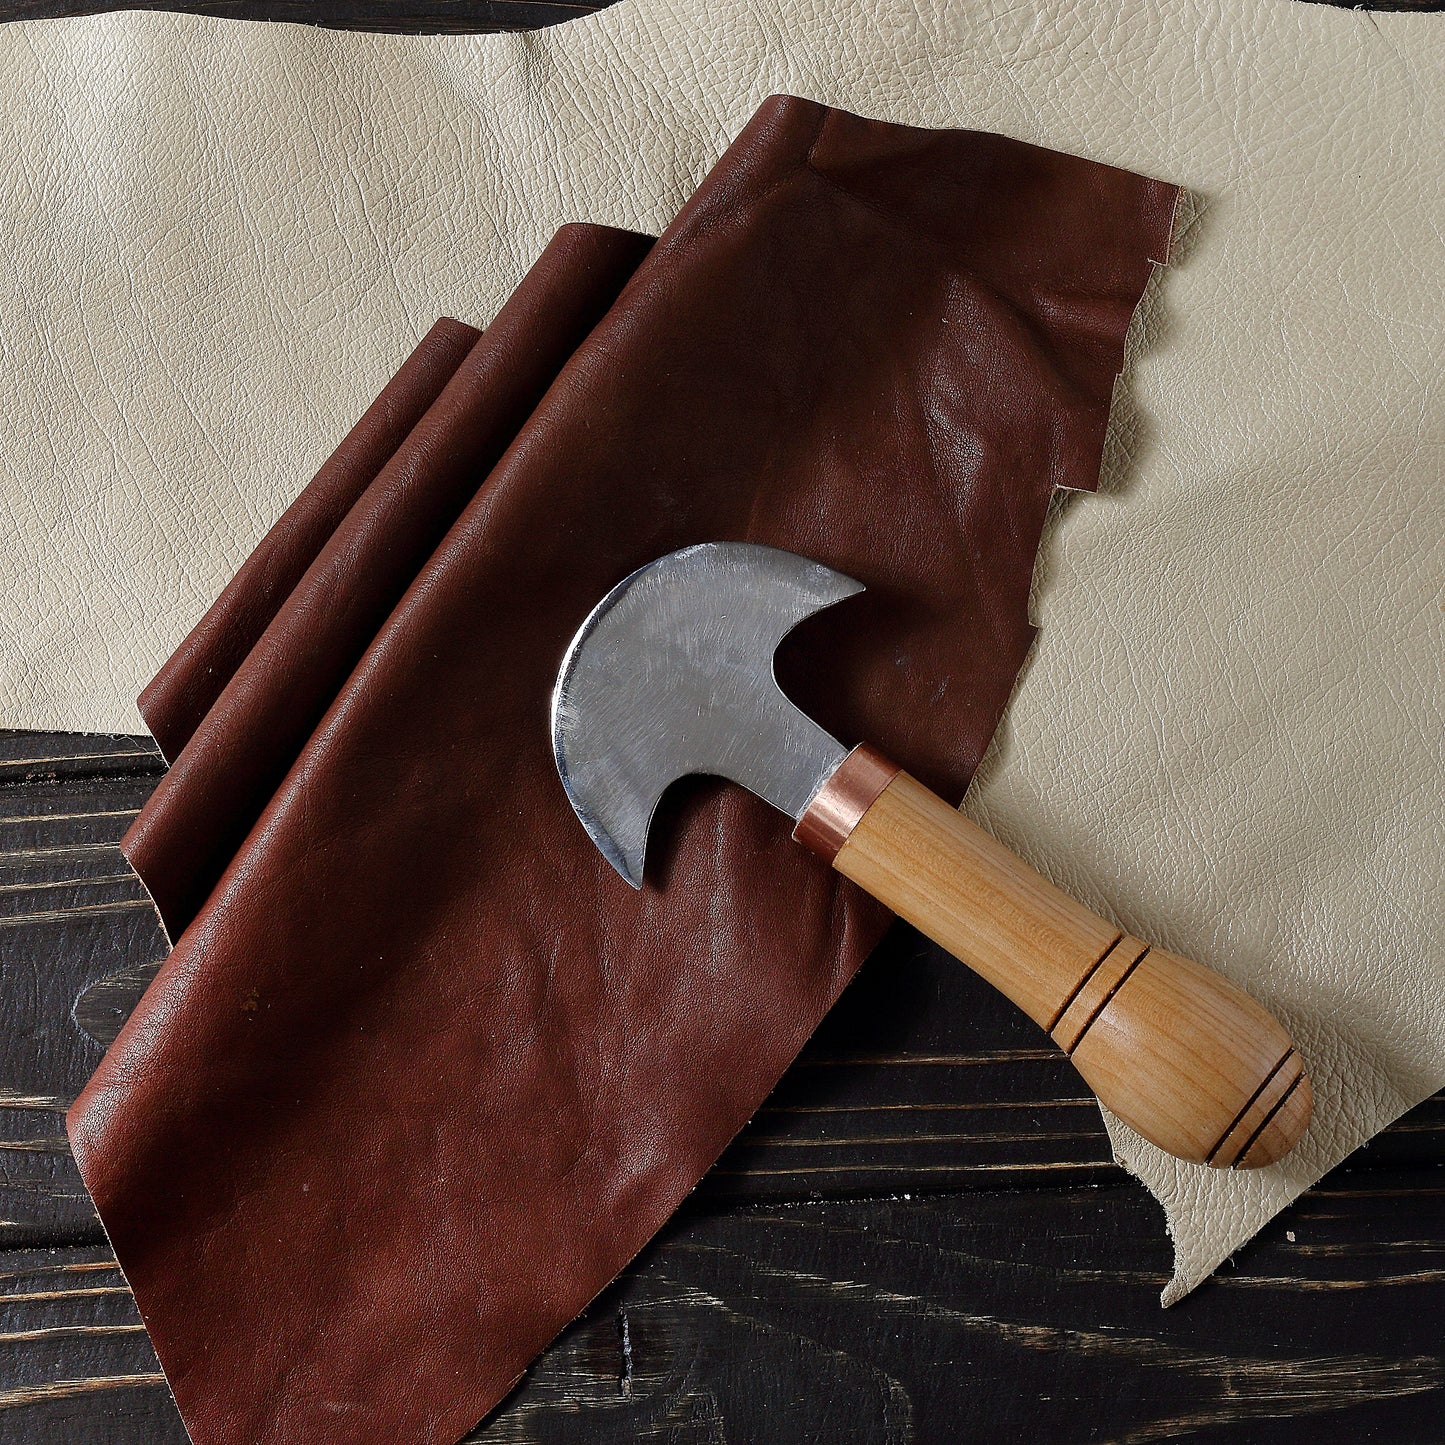 Round Leather Knife. Doubled Edged, Rounded Knife for Leather Crafts - by Stamesky.